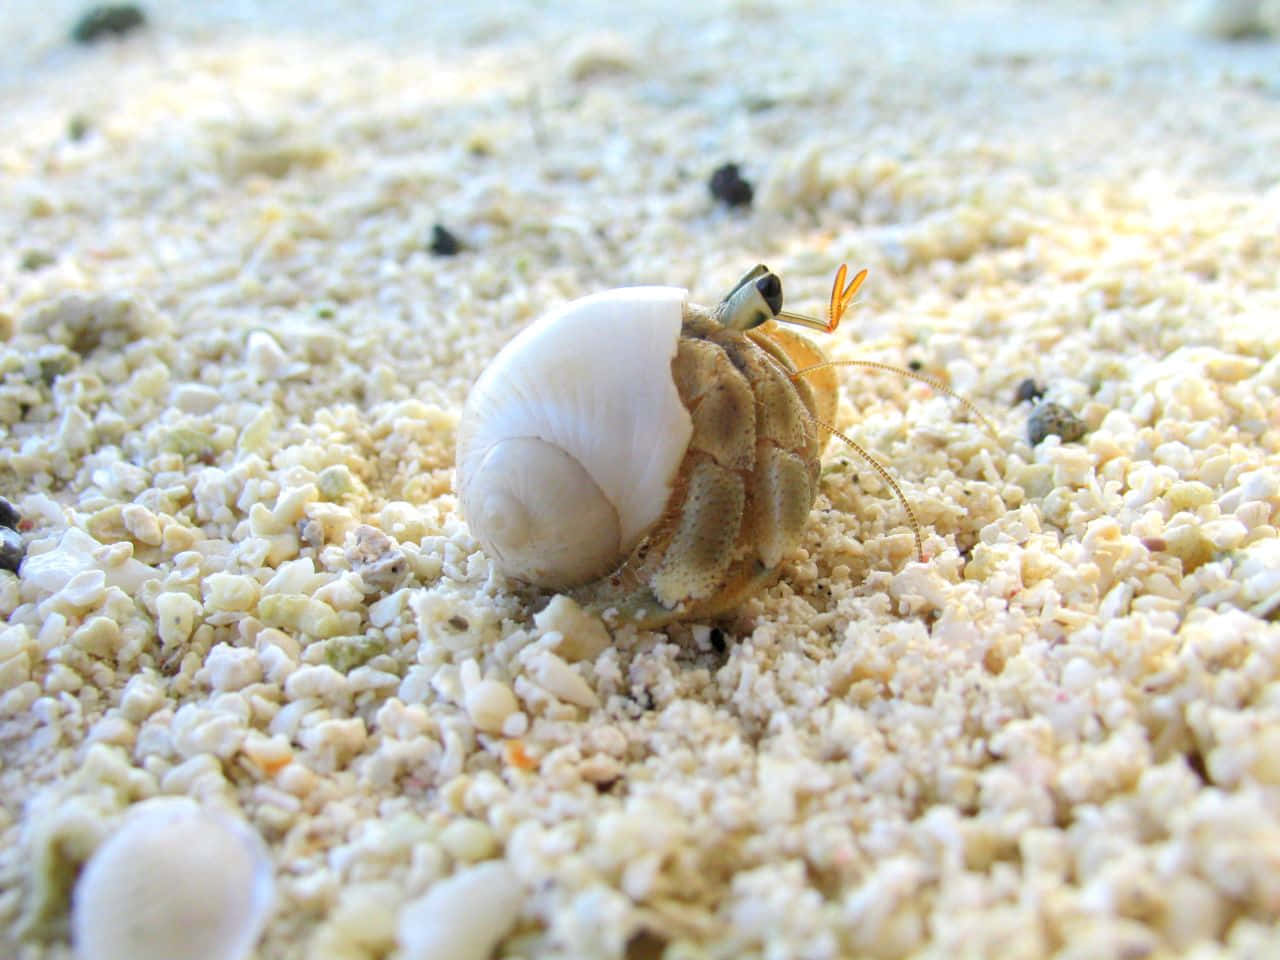 Intriguing Close-up Of A Hermit Crab Wallpaper